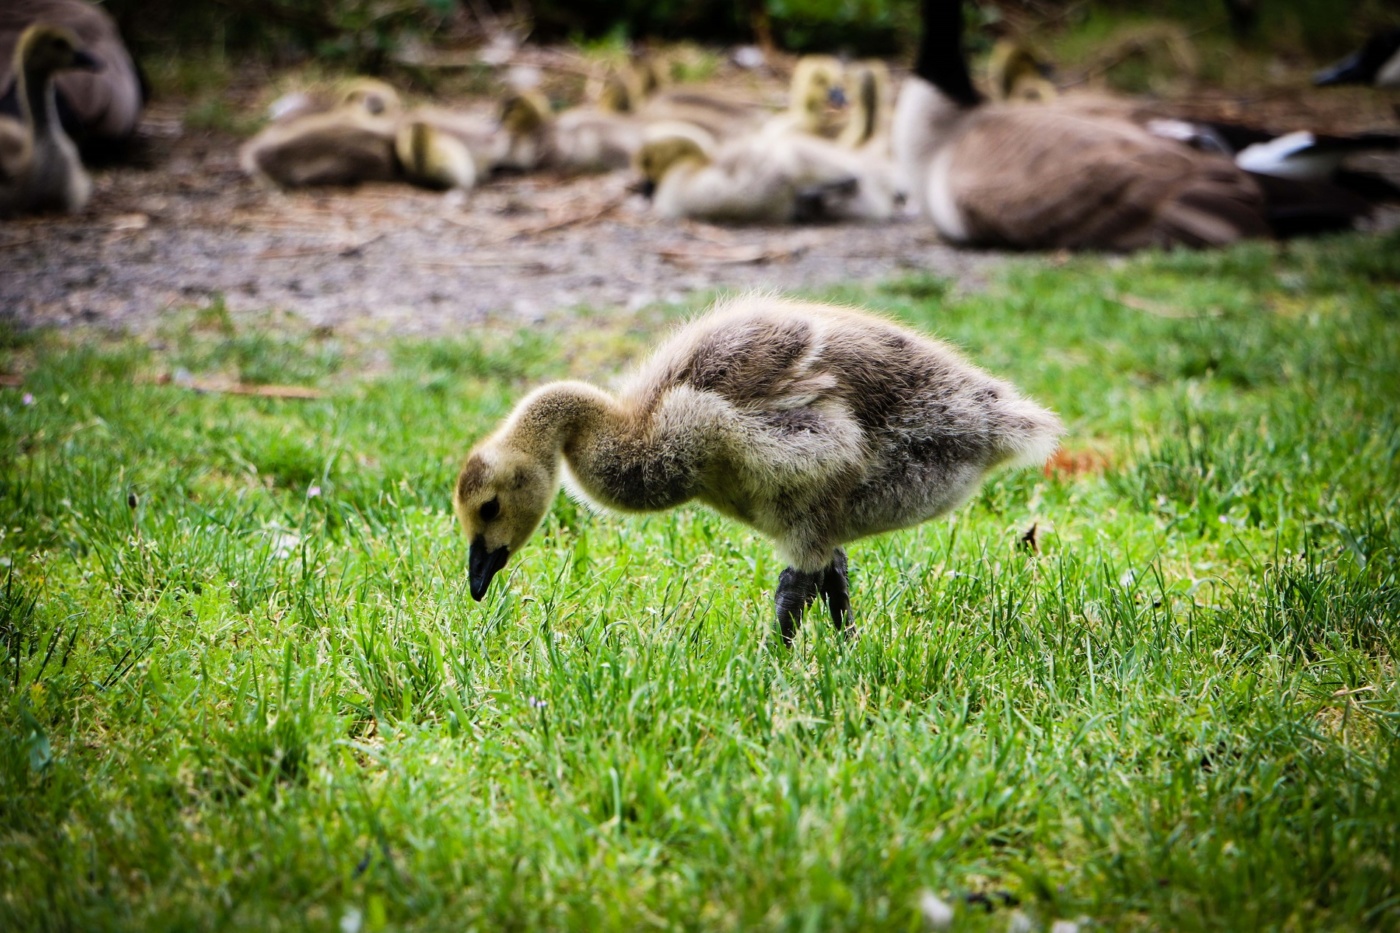 A gosling on the grass in front of Waughop Lake in Fort Steilacoom Park in Lakewood, WA